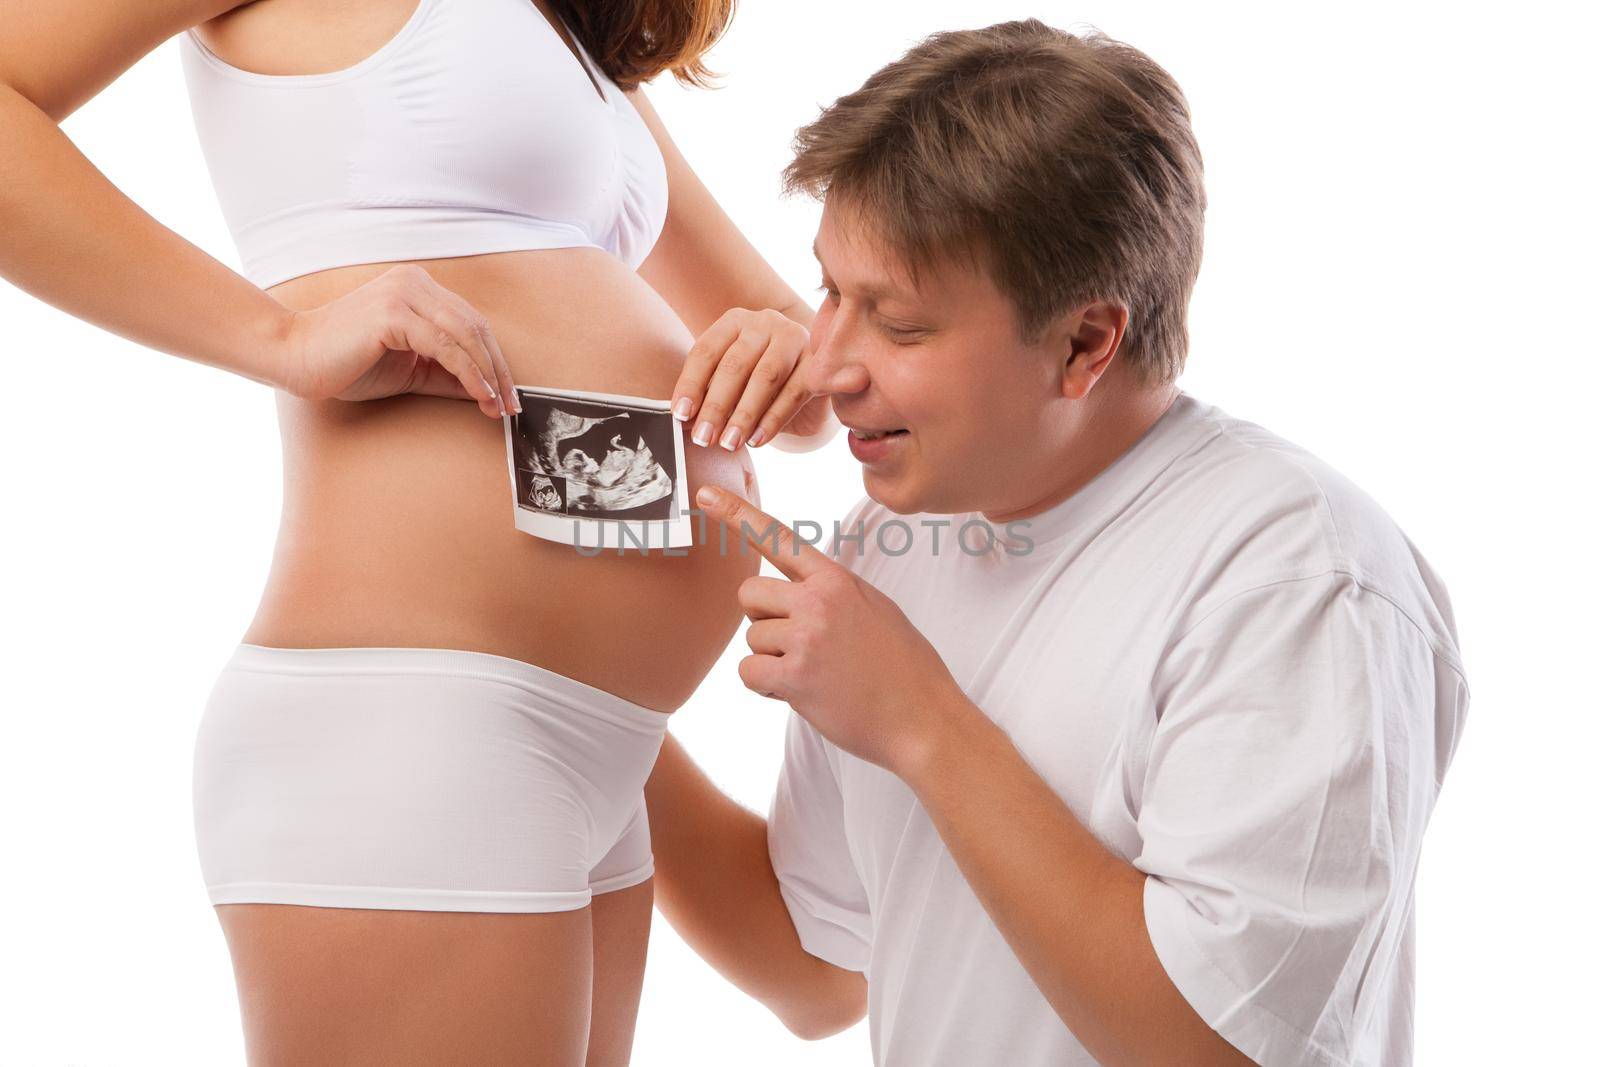 Pregnant woman and her husband is holding her stomach and a photo of her Ultrasound